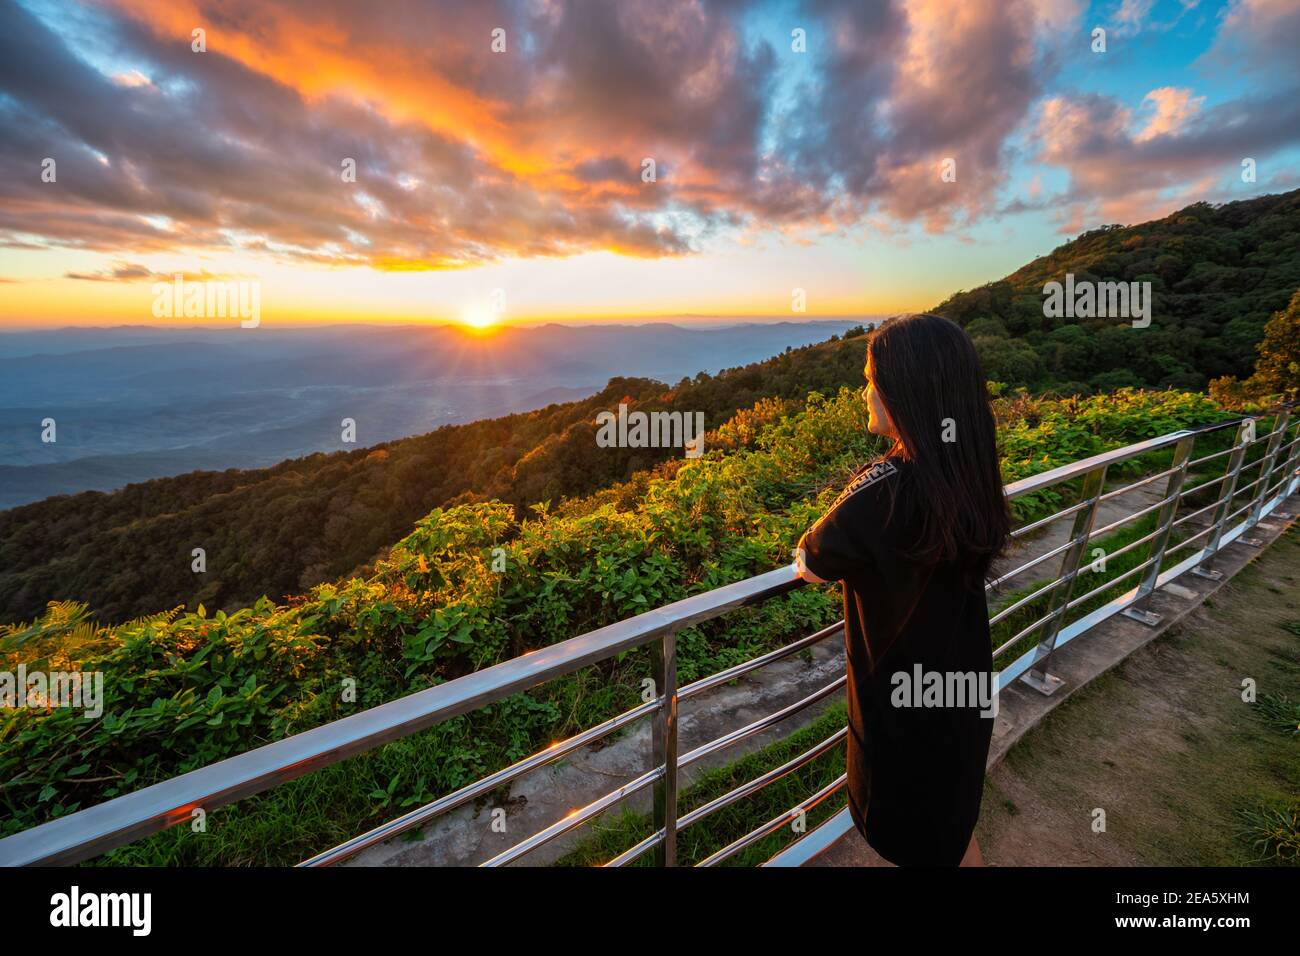 Tropical forest nature landscape view with woman toursit looking sunset mountain range at Doi Inthanon, Chiang Mai Thailand Stock Photo